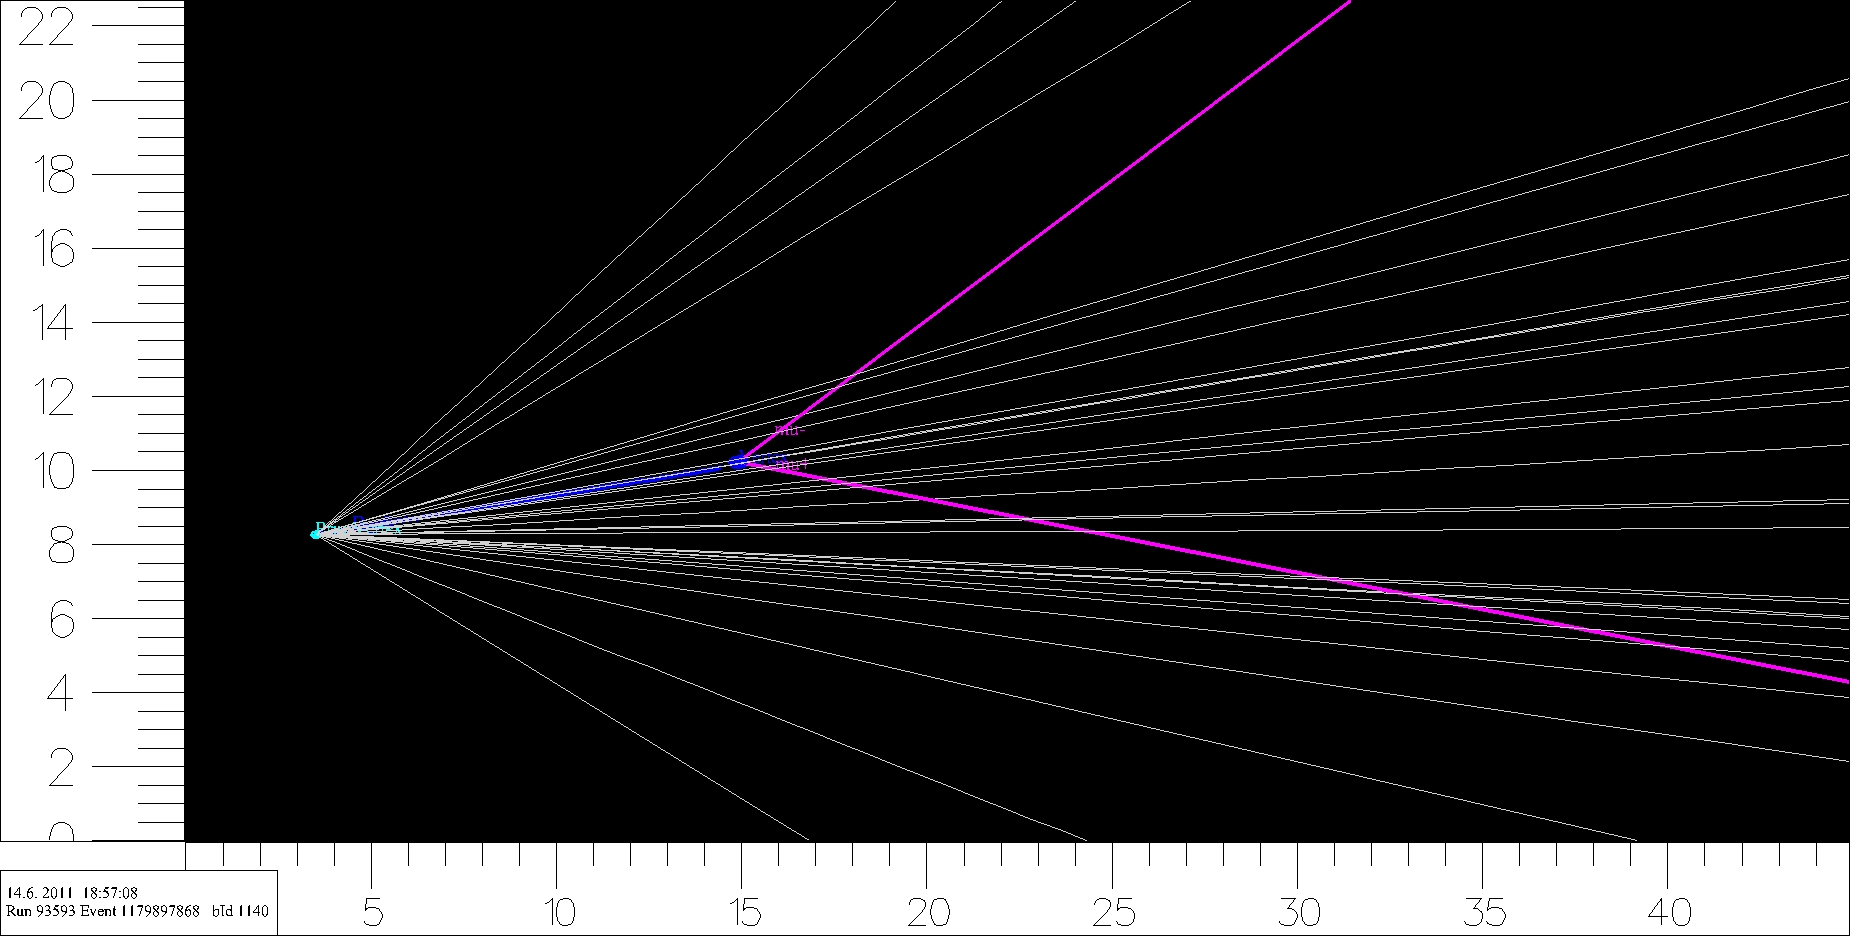 A computer reconstruction of the tracks in a proton-proton collision measured by LHCb.  Most tracks start at the proton-proton collision point, but the two tracks drawn in purple emerge from a different point, the apparent location of the decay of a hadron containing a bottom quark.